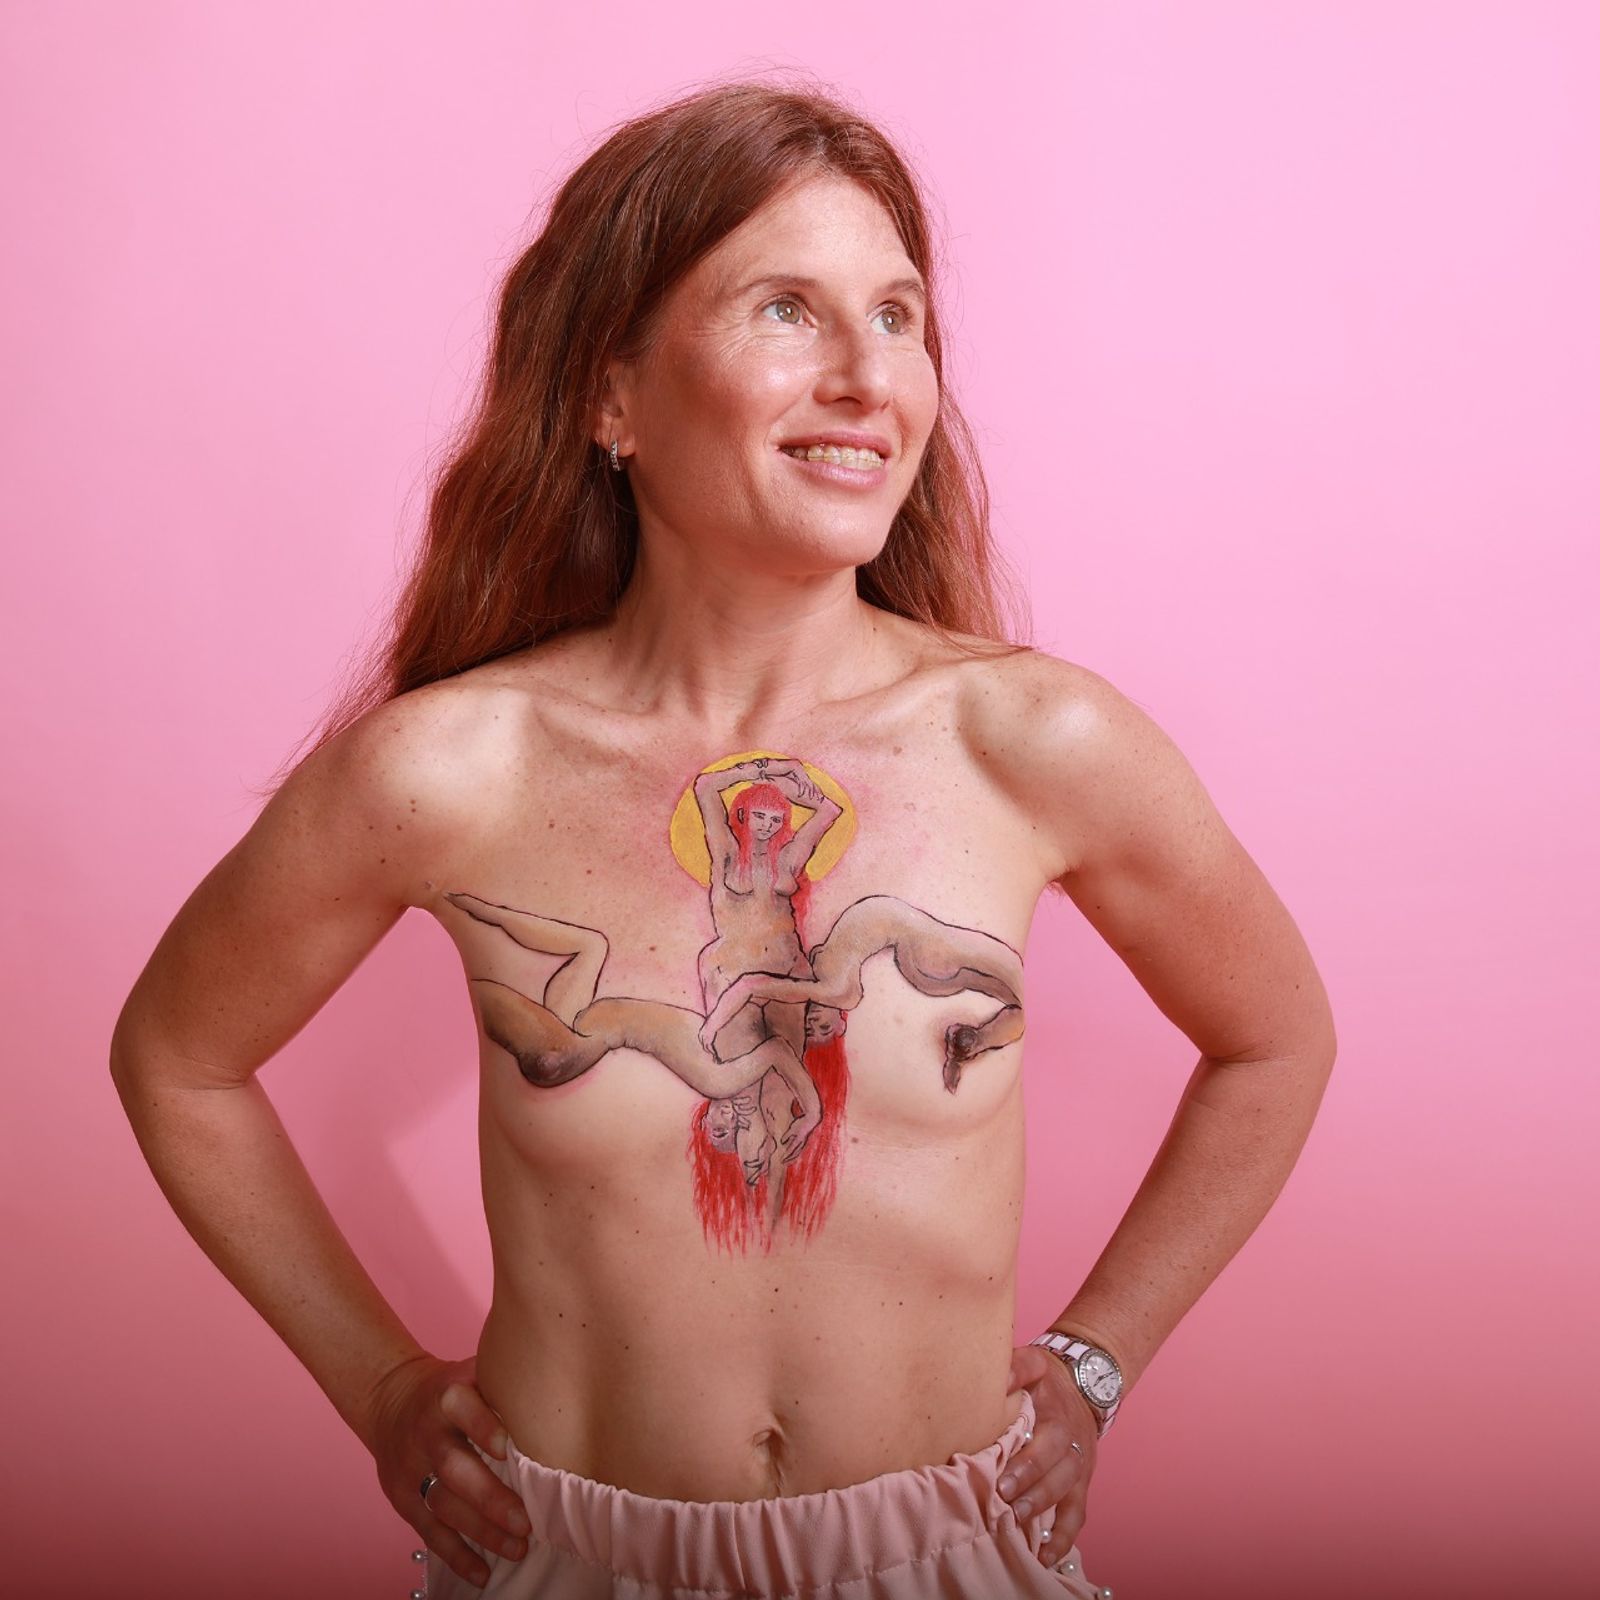 © Andrea Guedella - Image from the "PUT YOUR CHEST FORWARD "- LOVE YOUR BREAST. photography project